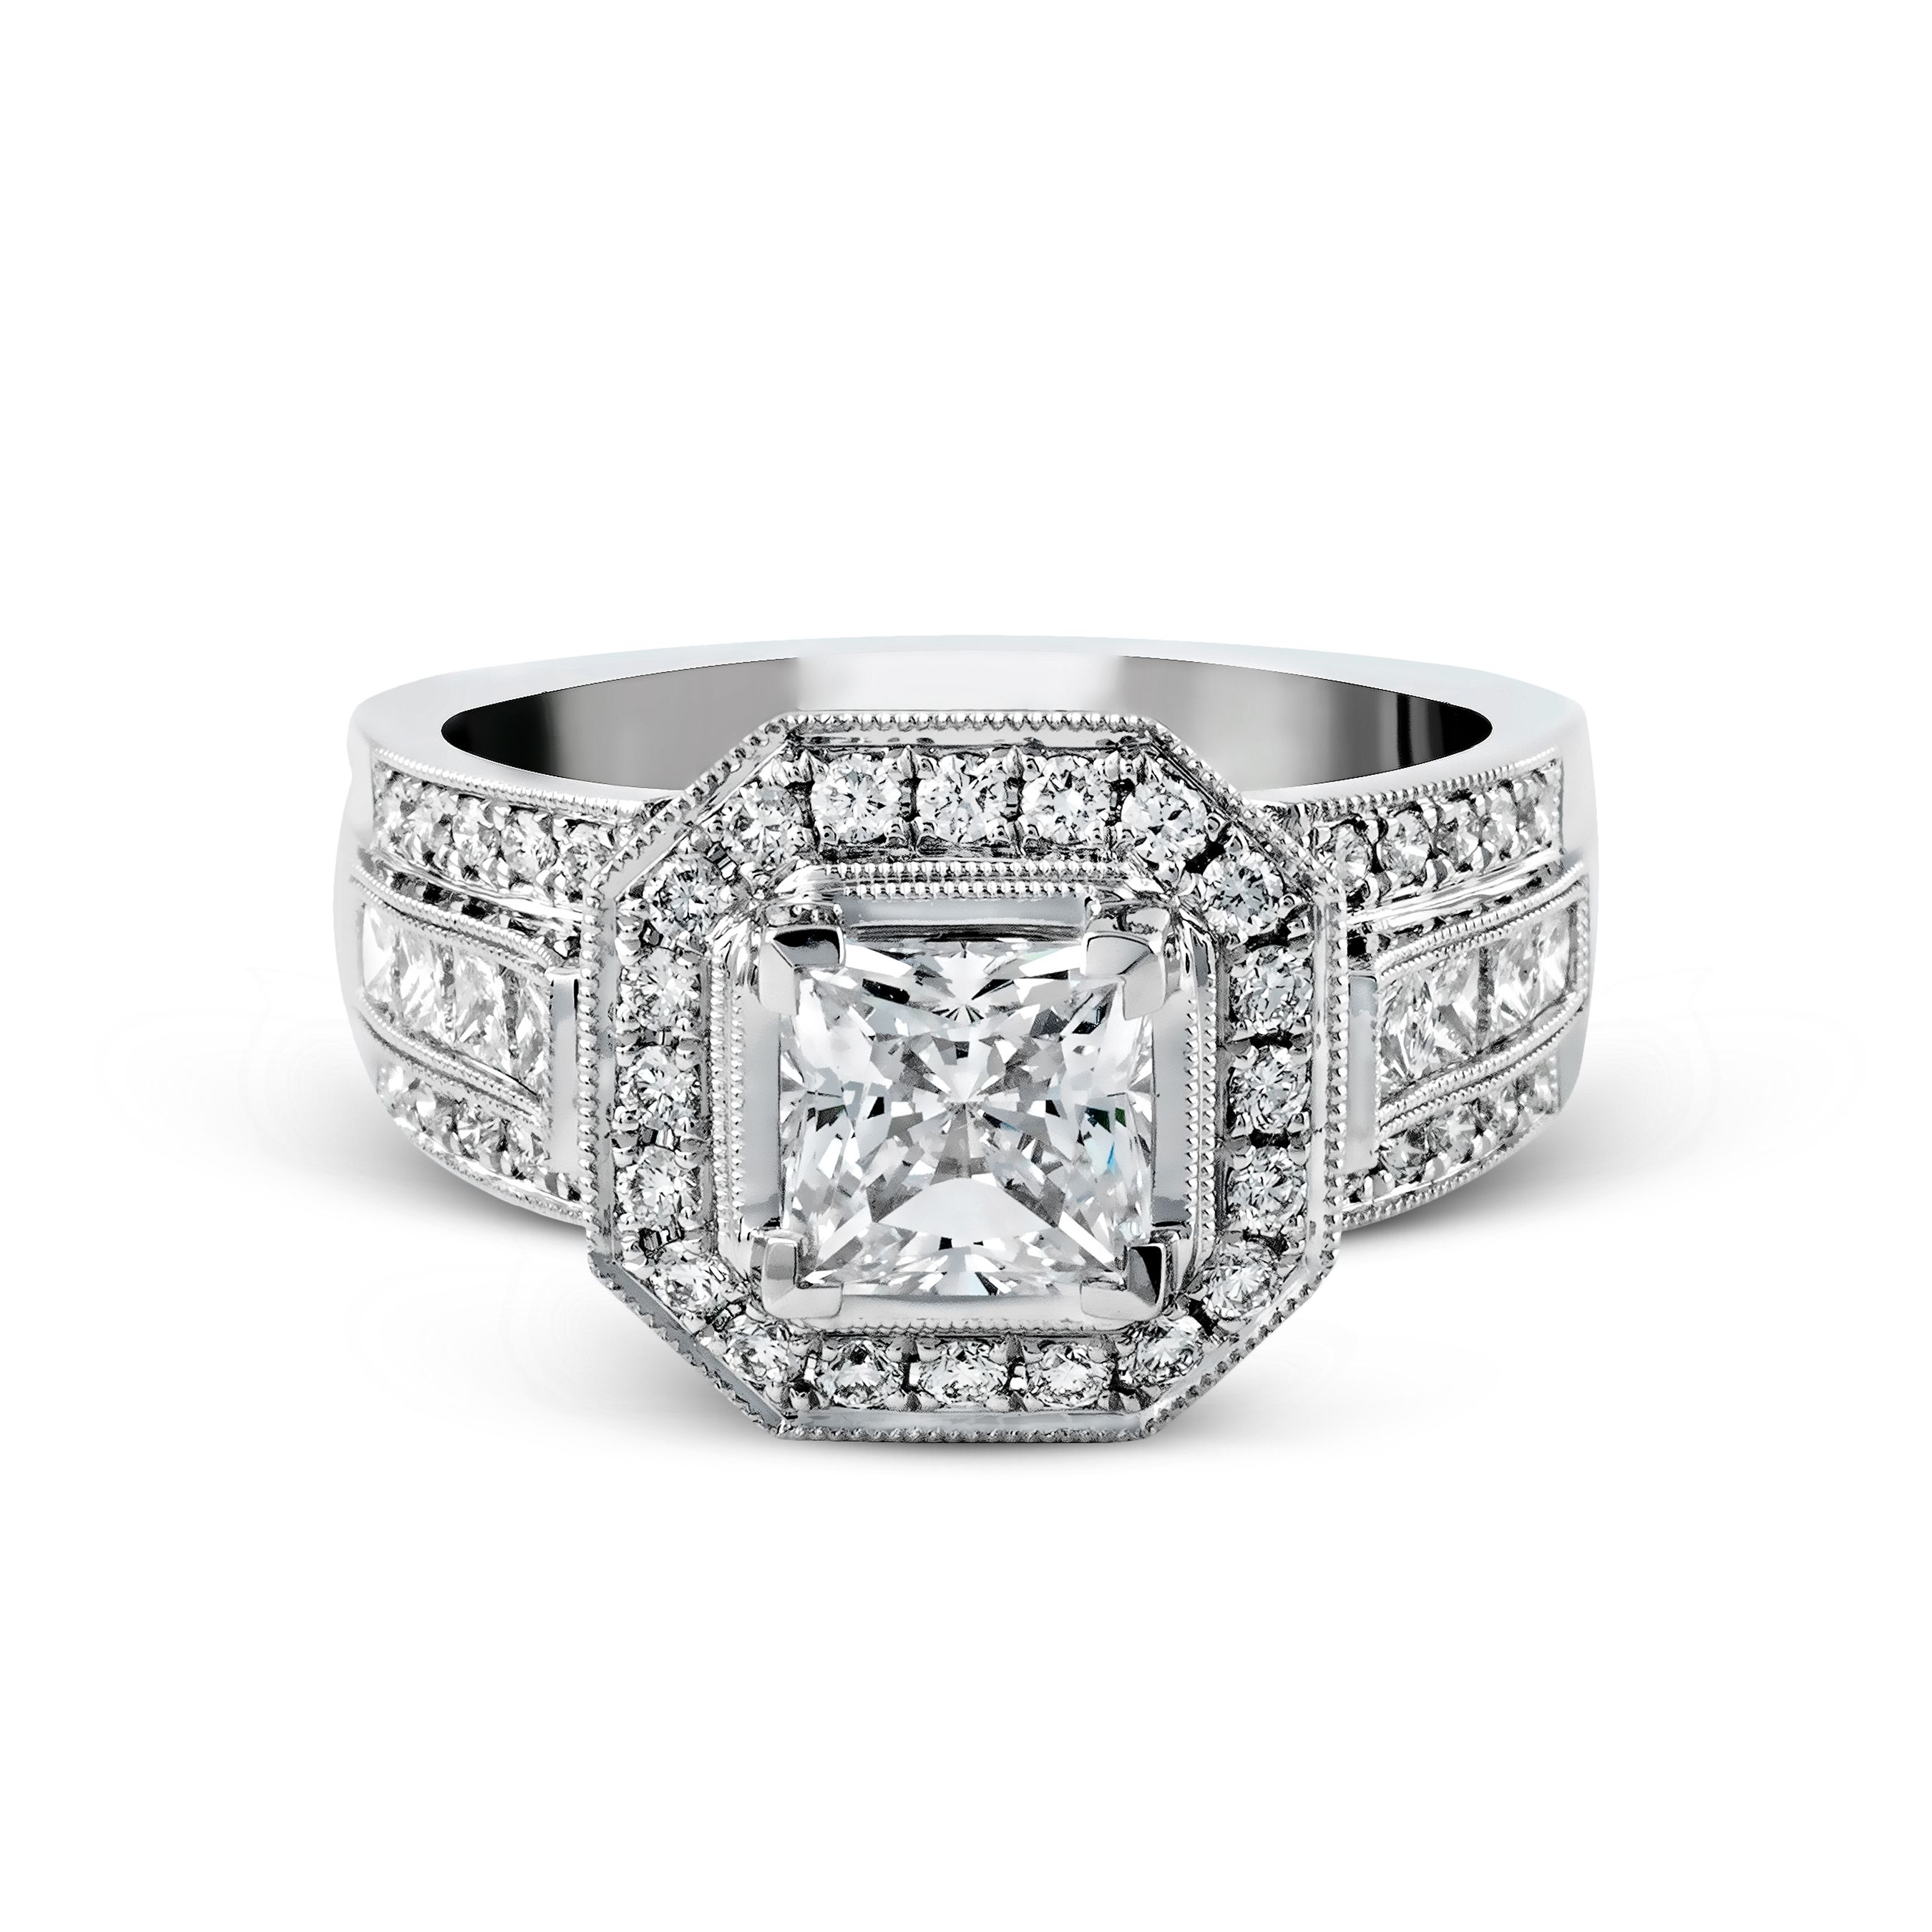 NR109-A Passion Collection White Gold Princess Cut Engagement Ring